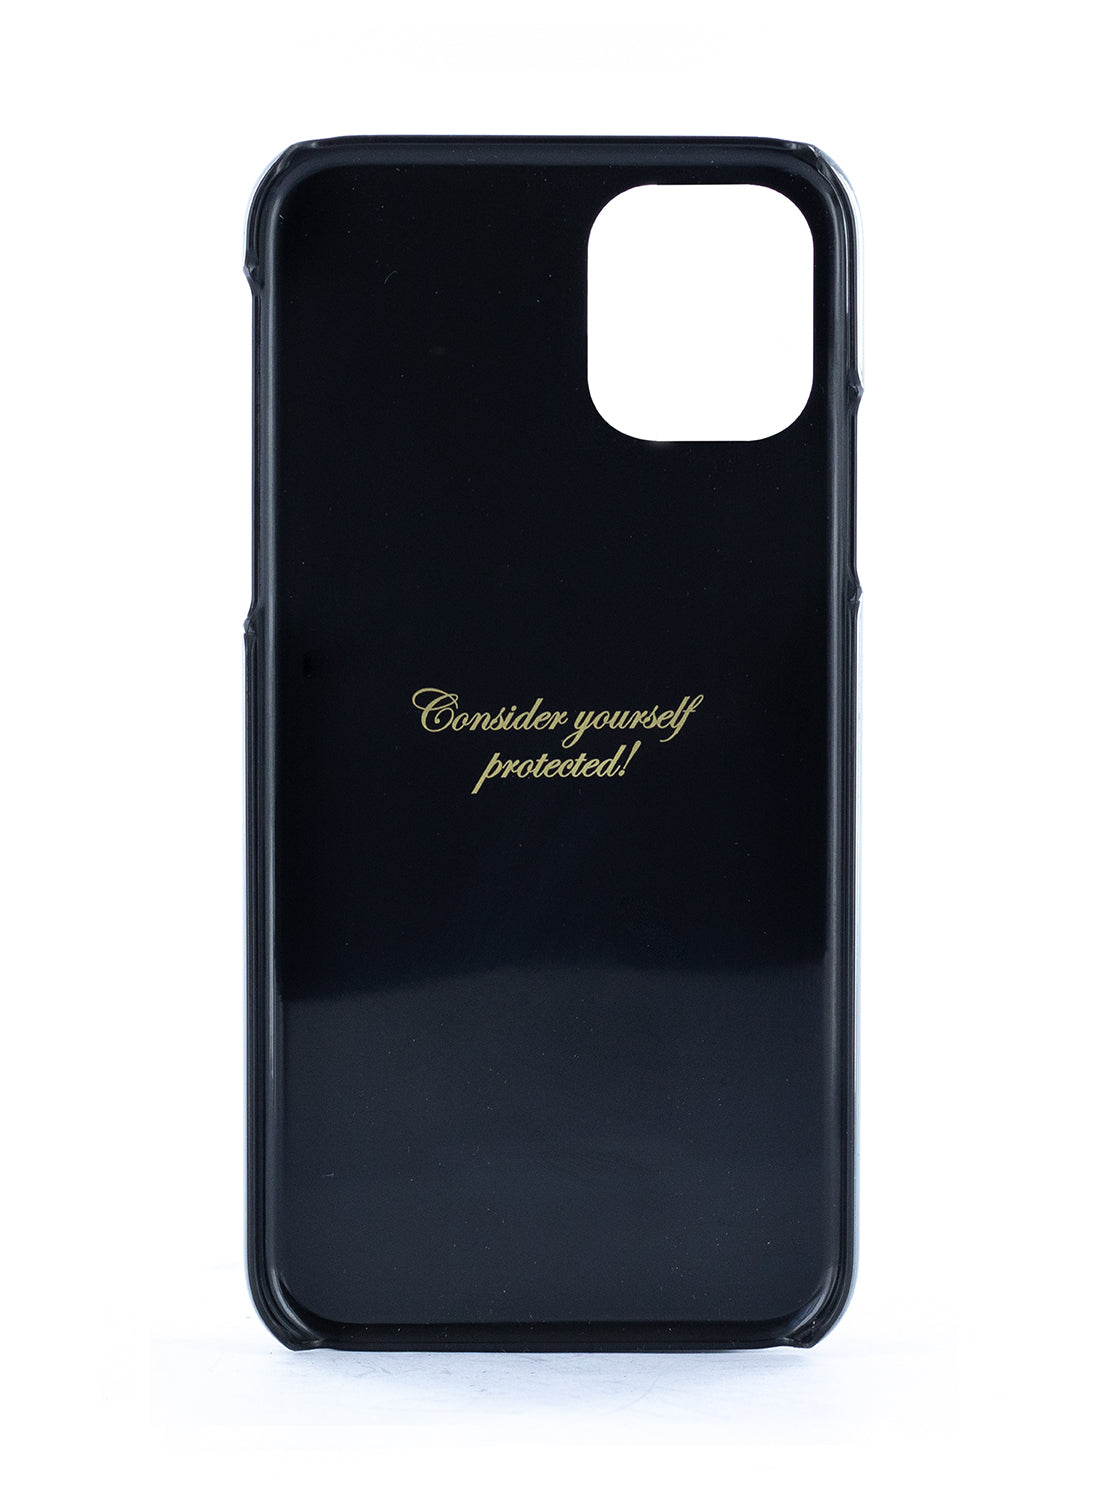 TED BAKER Opal Hard Shell Case for iPhone 11 Pro